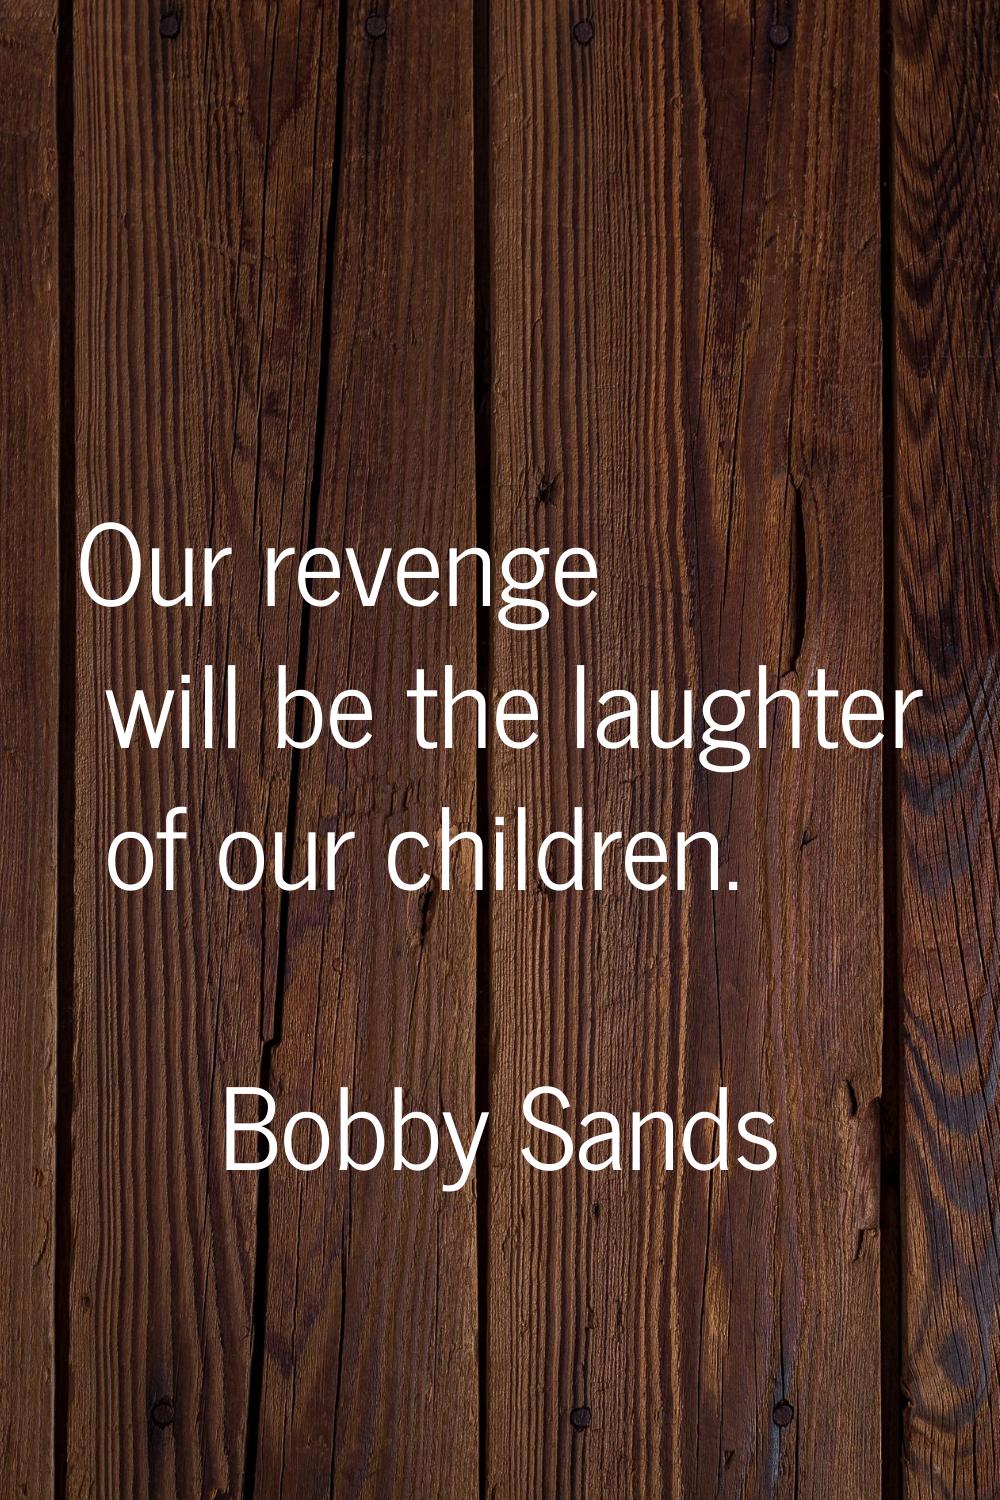 Our revenge will be the laughter of our children.